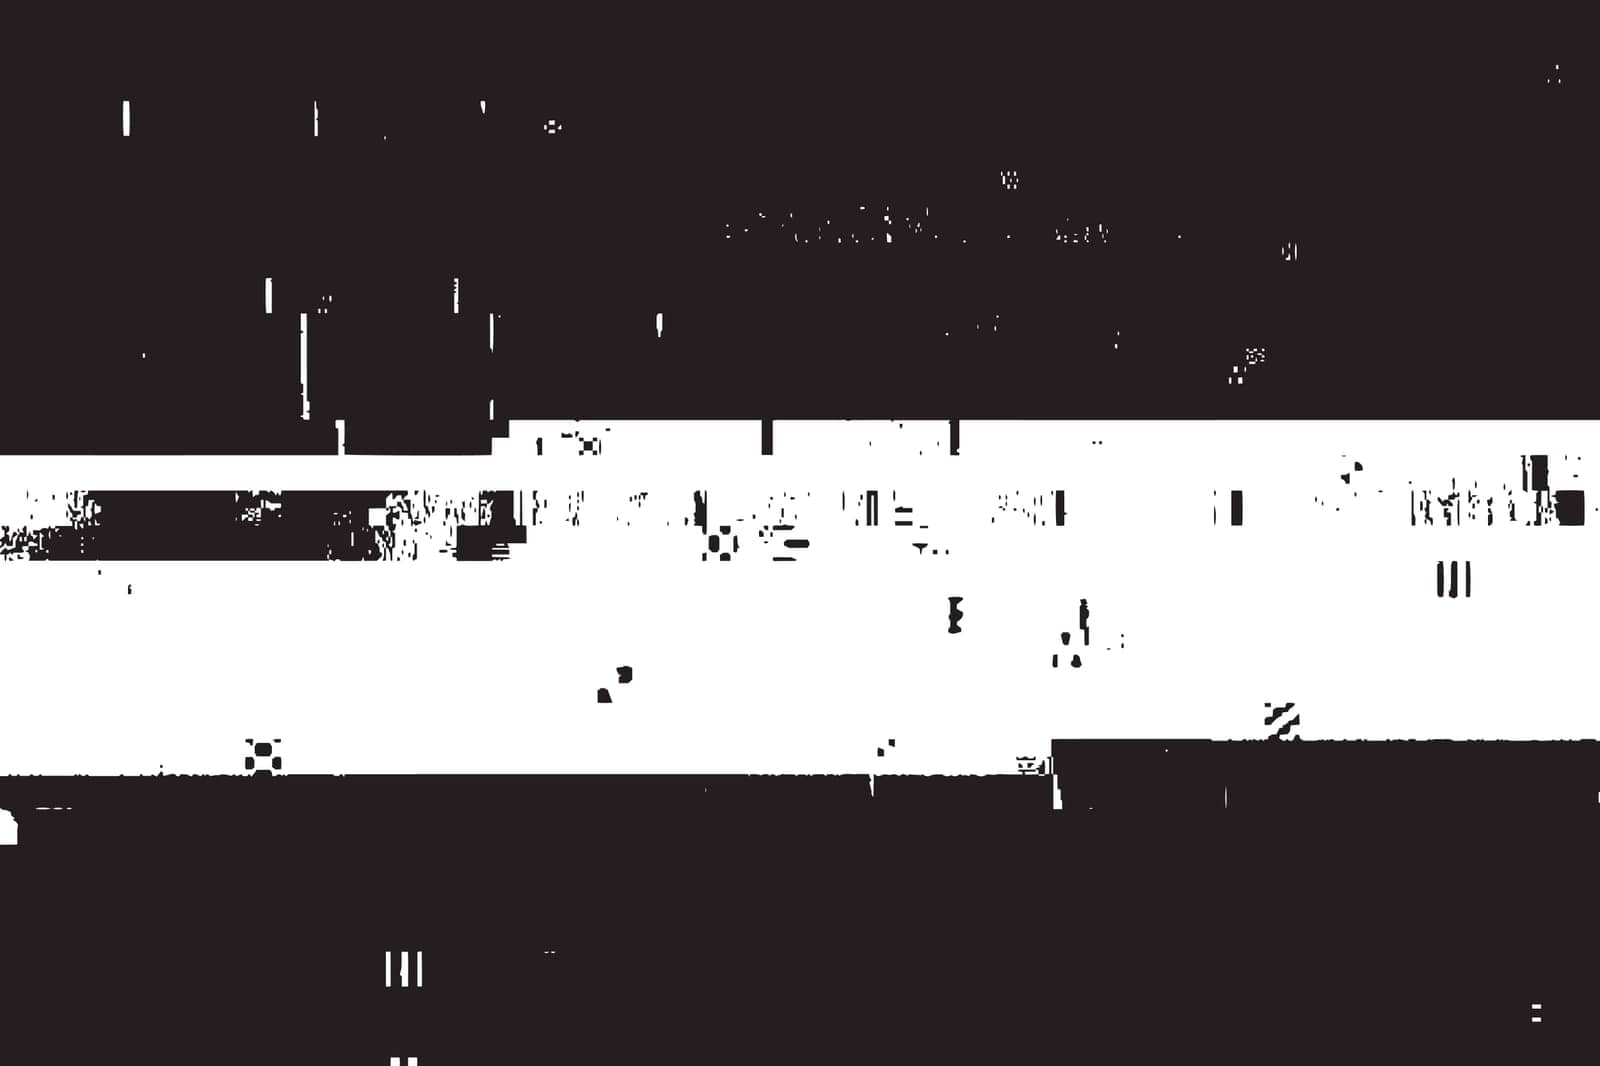 Glitch overlay distress texture. Cyber hacker attack theme creative design template. Grunge glitched black and white background. EPS10 vector.